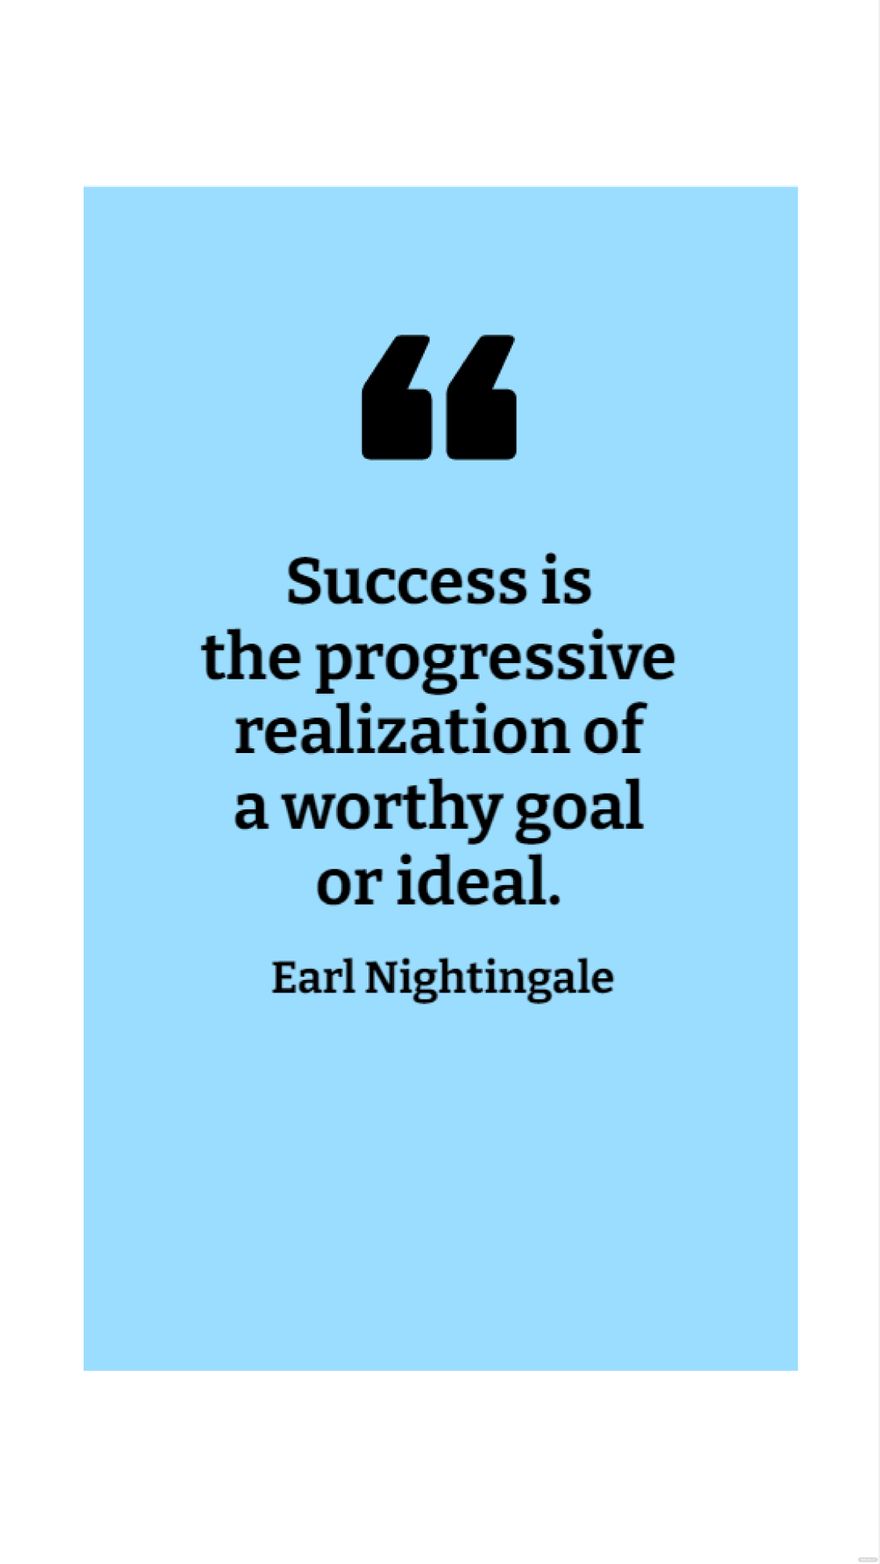 Free Earl Nightingale - Success is the progressive realization of a worthy goal or ideal.